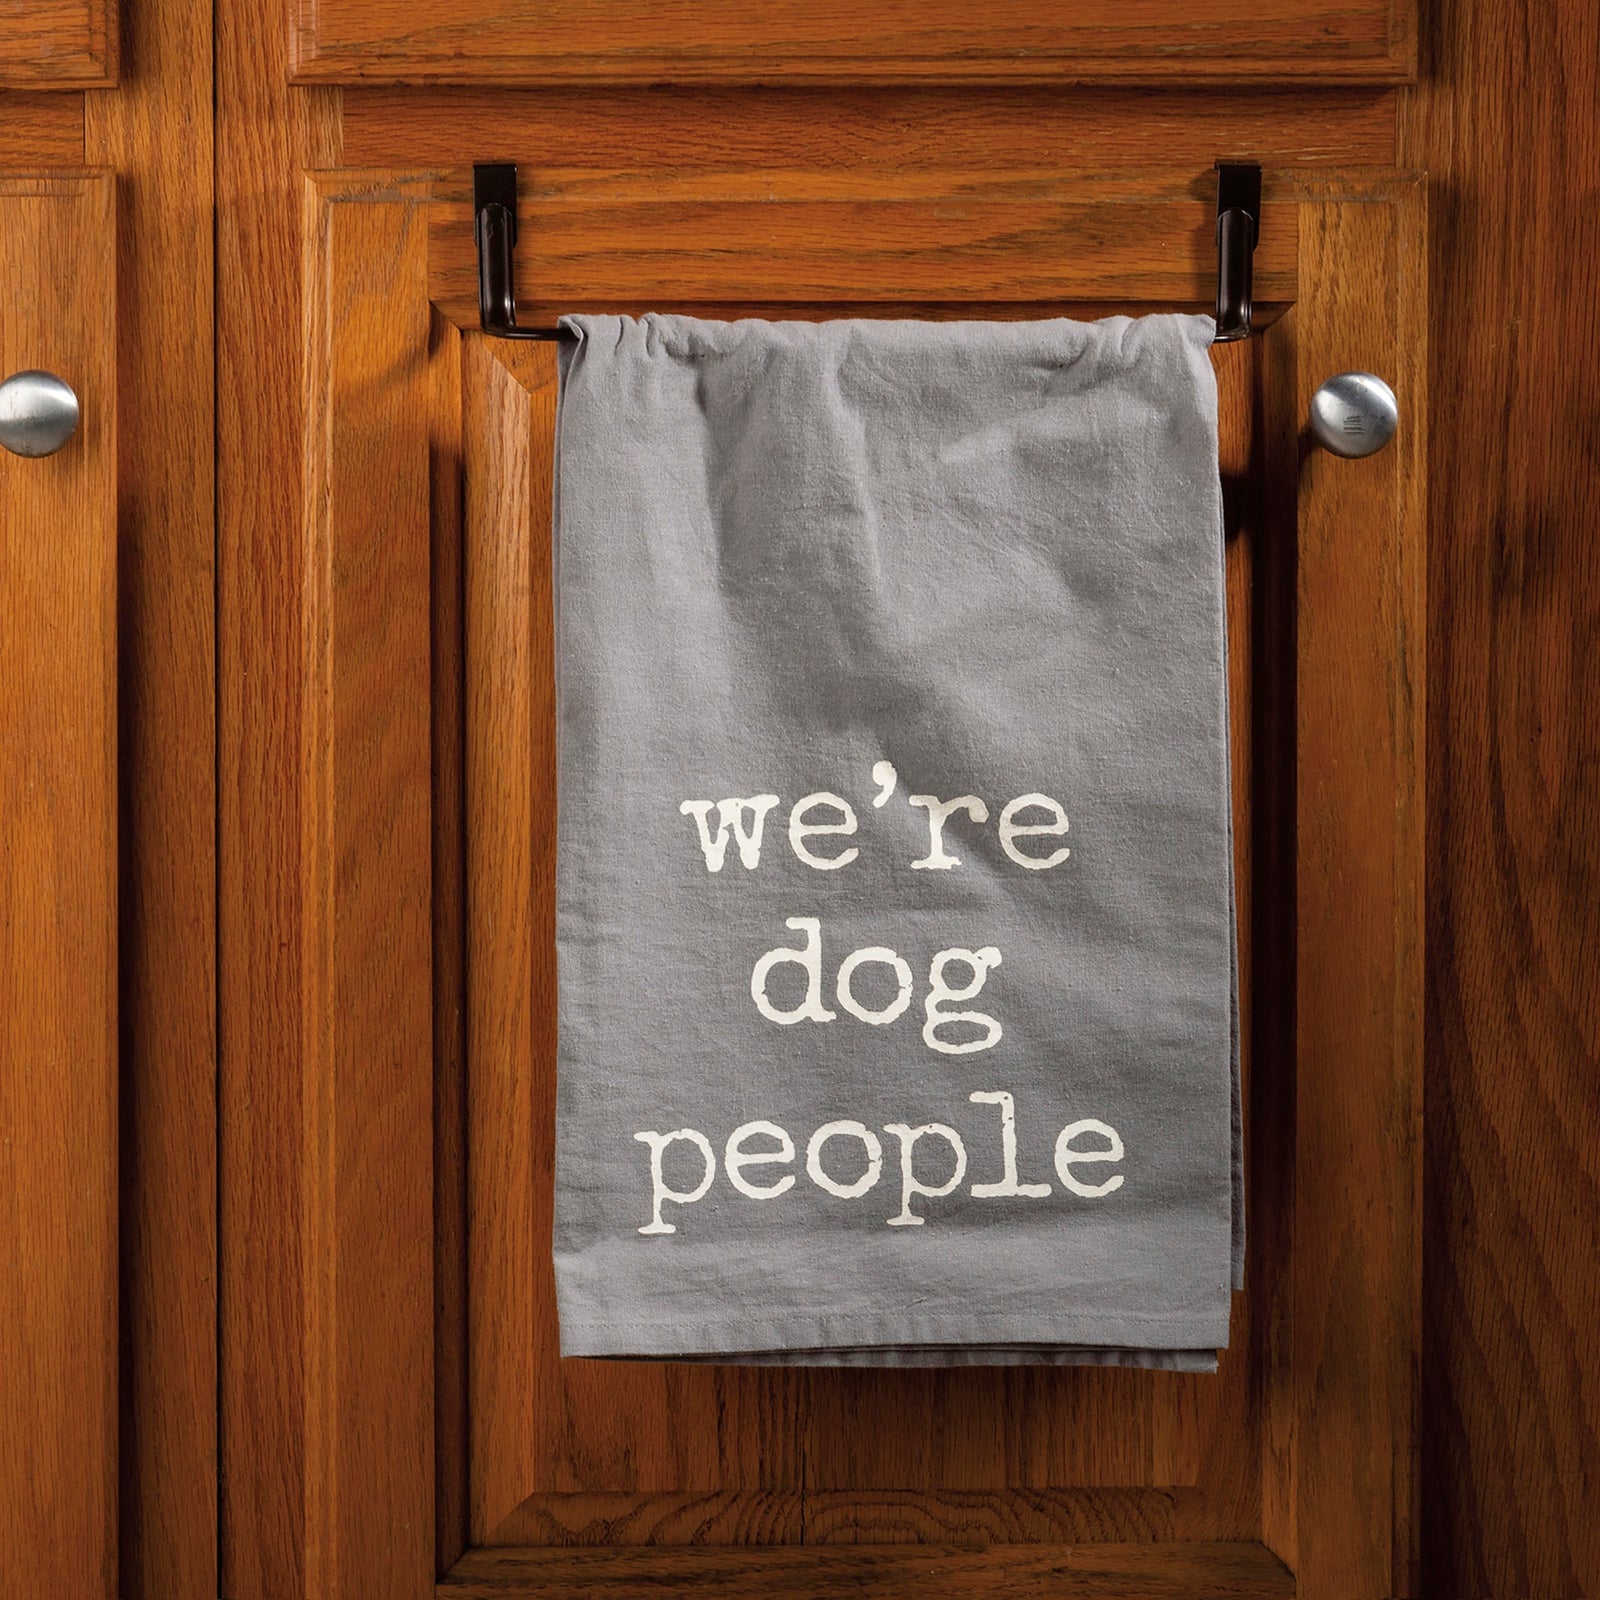 We're Dog People Dish Cloth Towel | Novelty Silly Tea Towel | Cute Hilarious Kitchen Towel